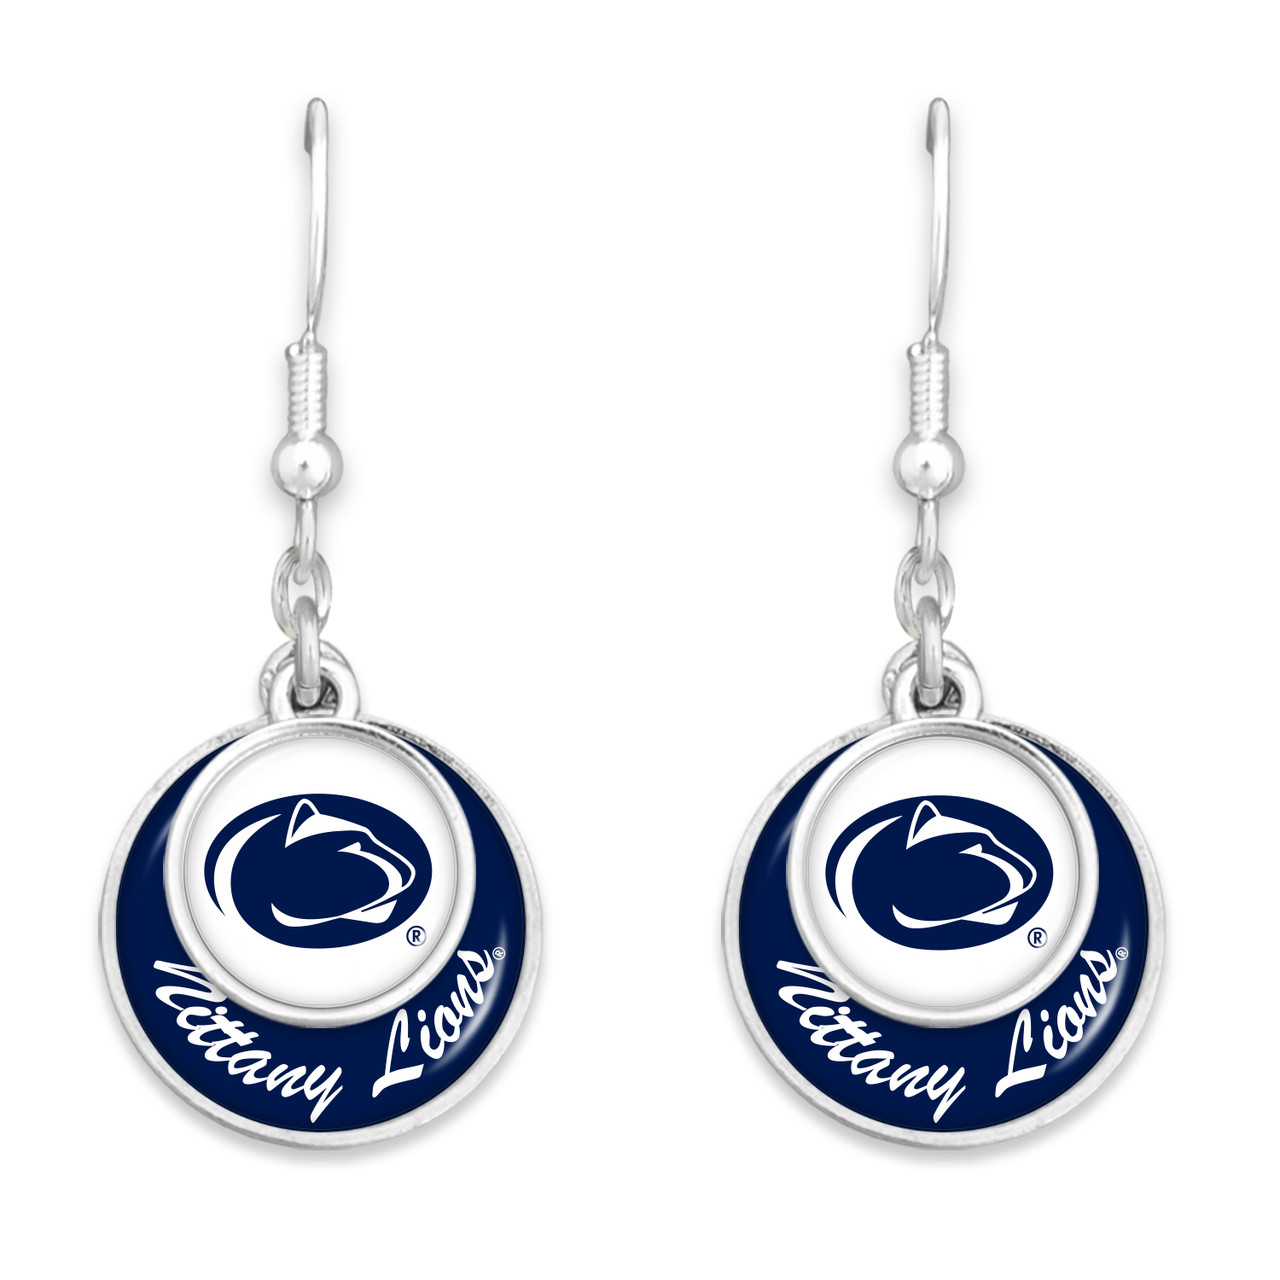 Penn State Nittany Lions Earrings- Stacked Disk